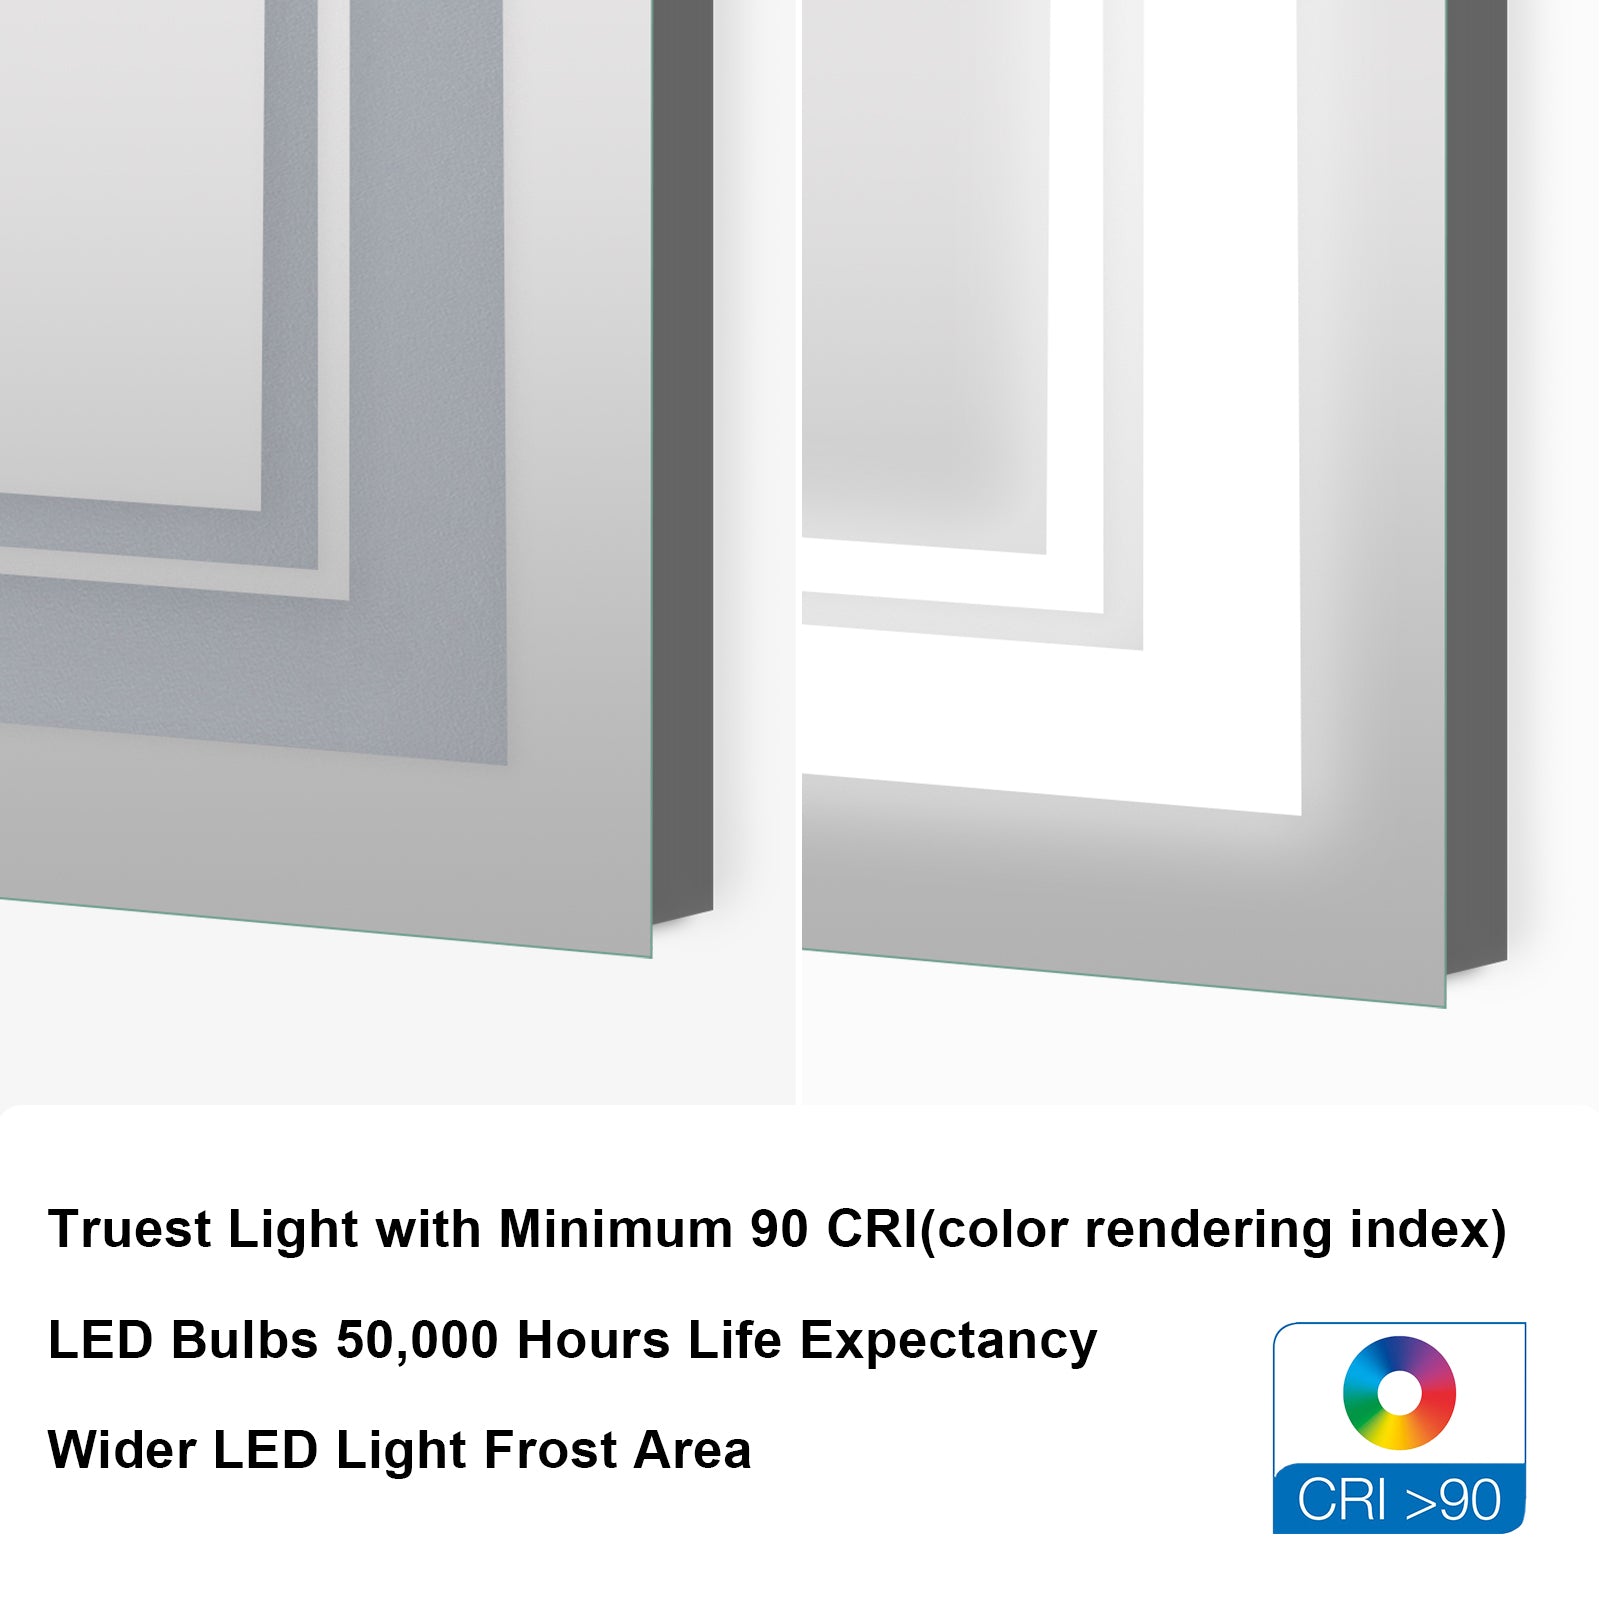 28x36 Inch LED Lighted Bathroom Mirror with 3 Colors silver-aluminium